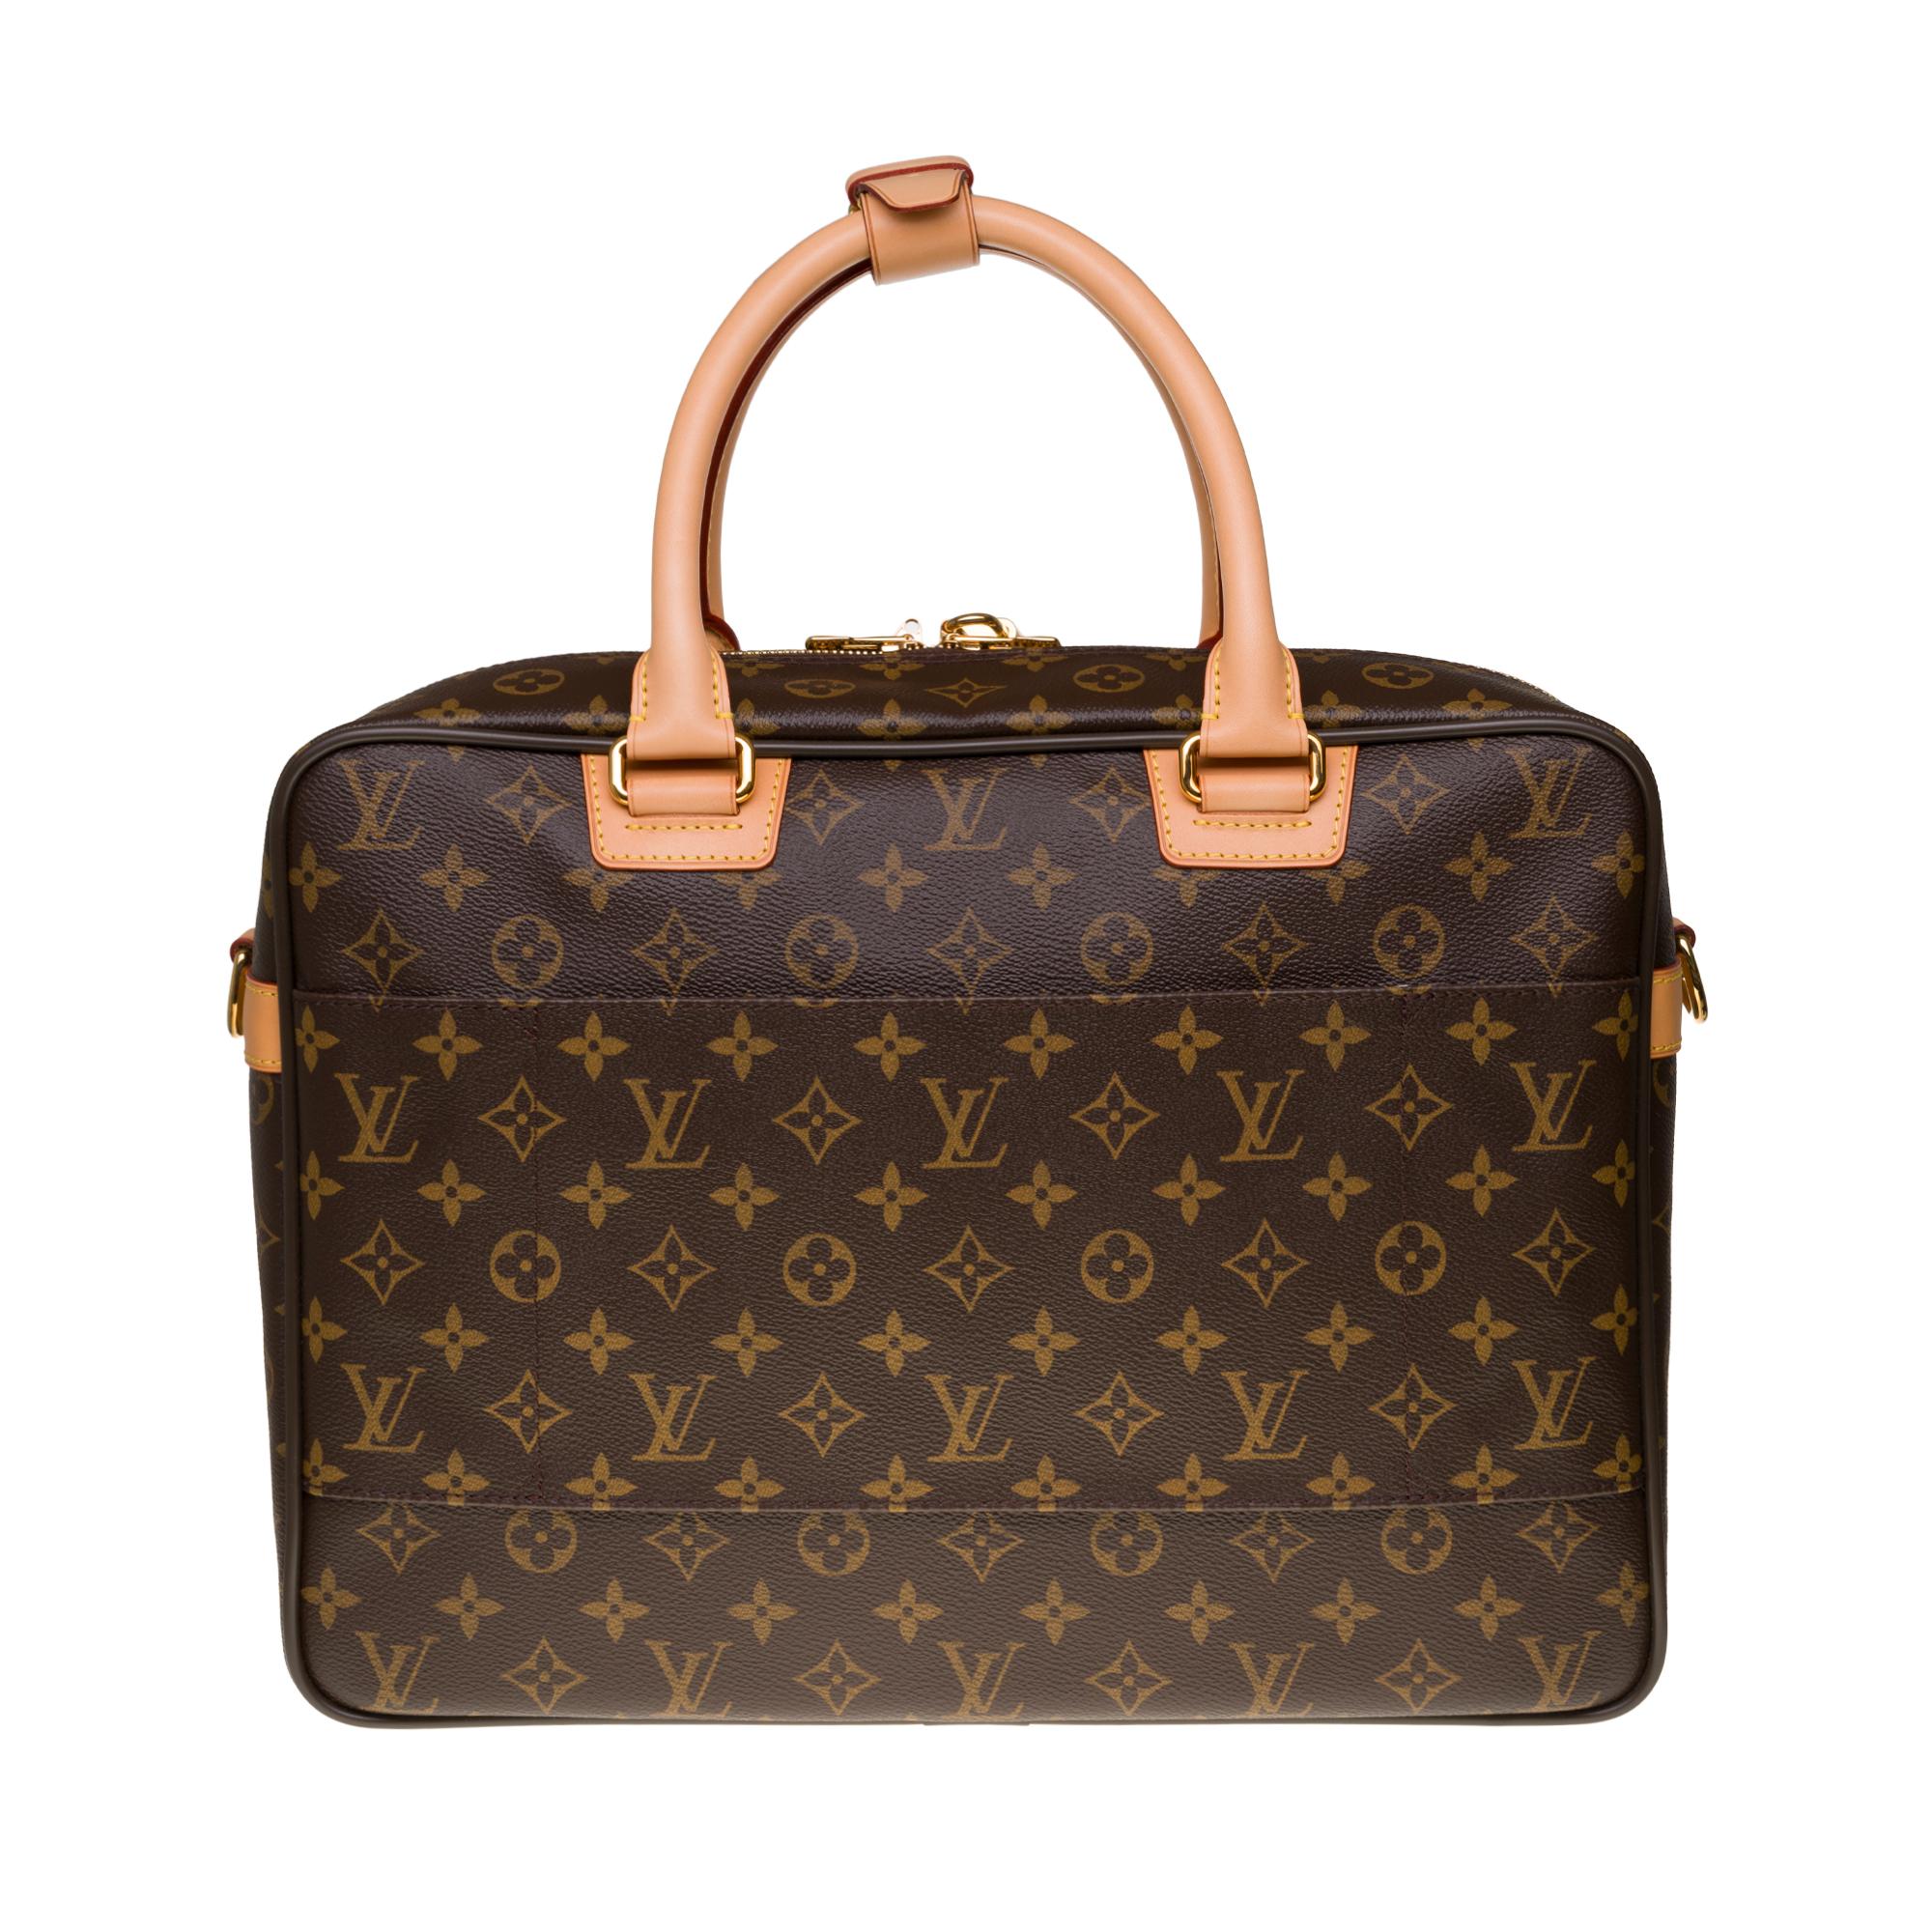 The indispensable Louis Vuitton Alize travel bag in monogram canvas and natural leather, gold metal hardware, double handle in natural leather, removable shoulder strap handle adjustable in black canvas allowing a hand or shoulder support.

Two zip